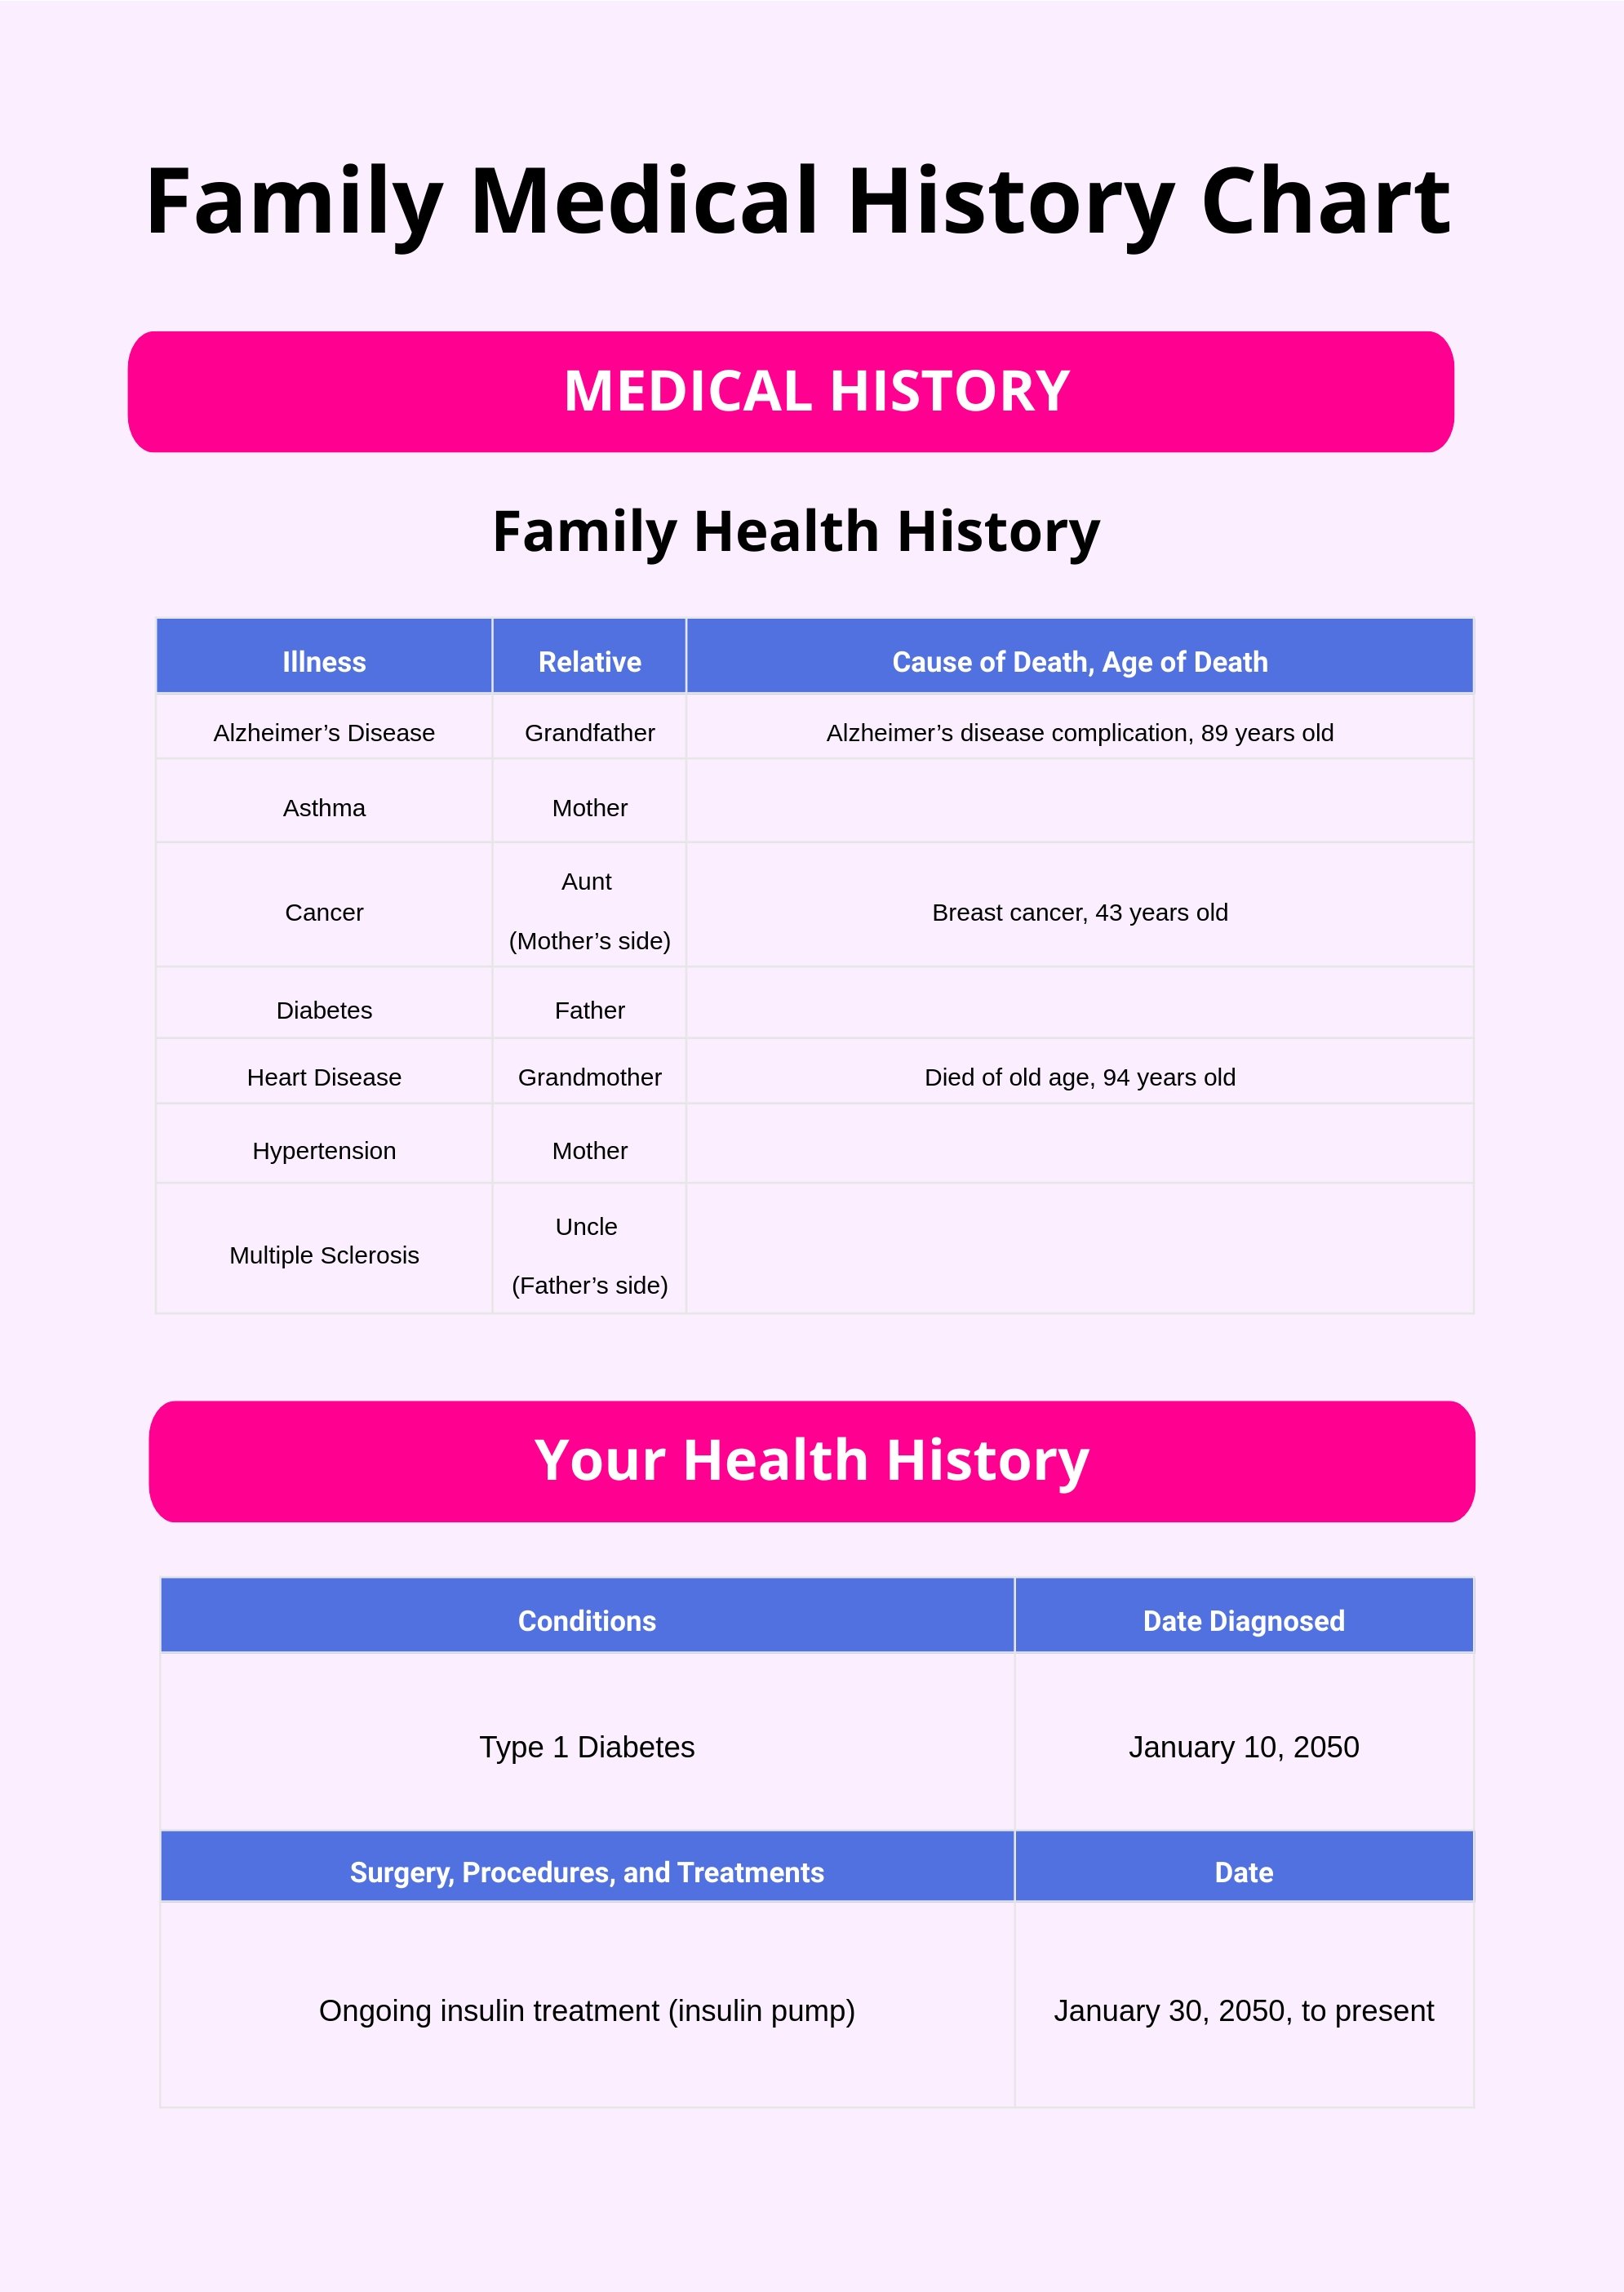 Free Family Medical History Chart Download in PDF, Illustrator